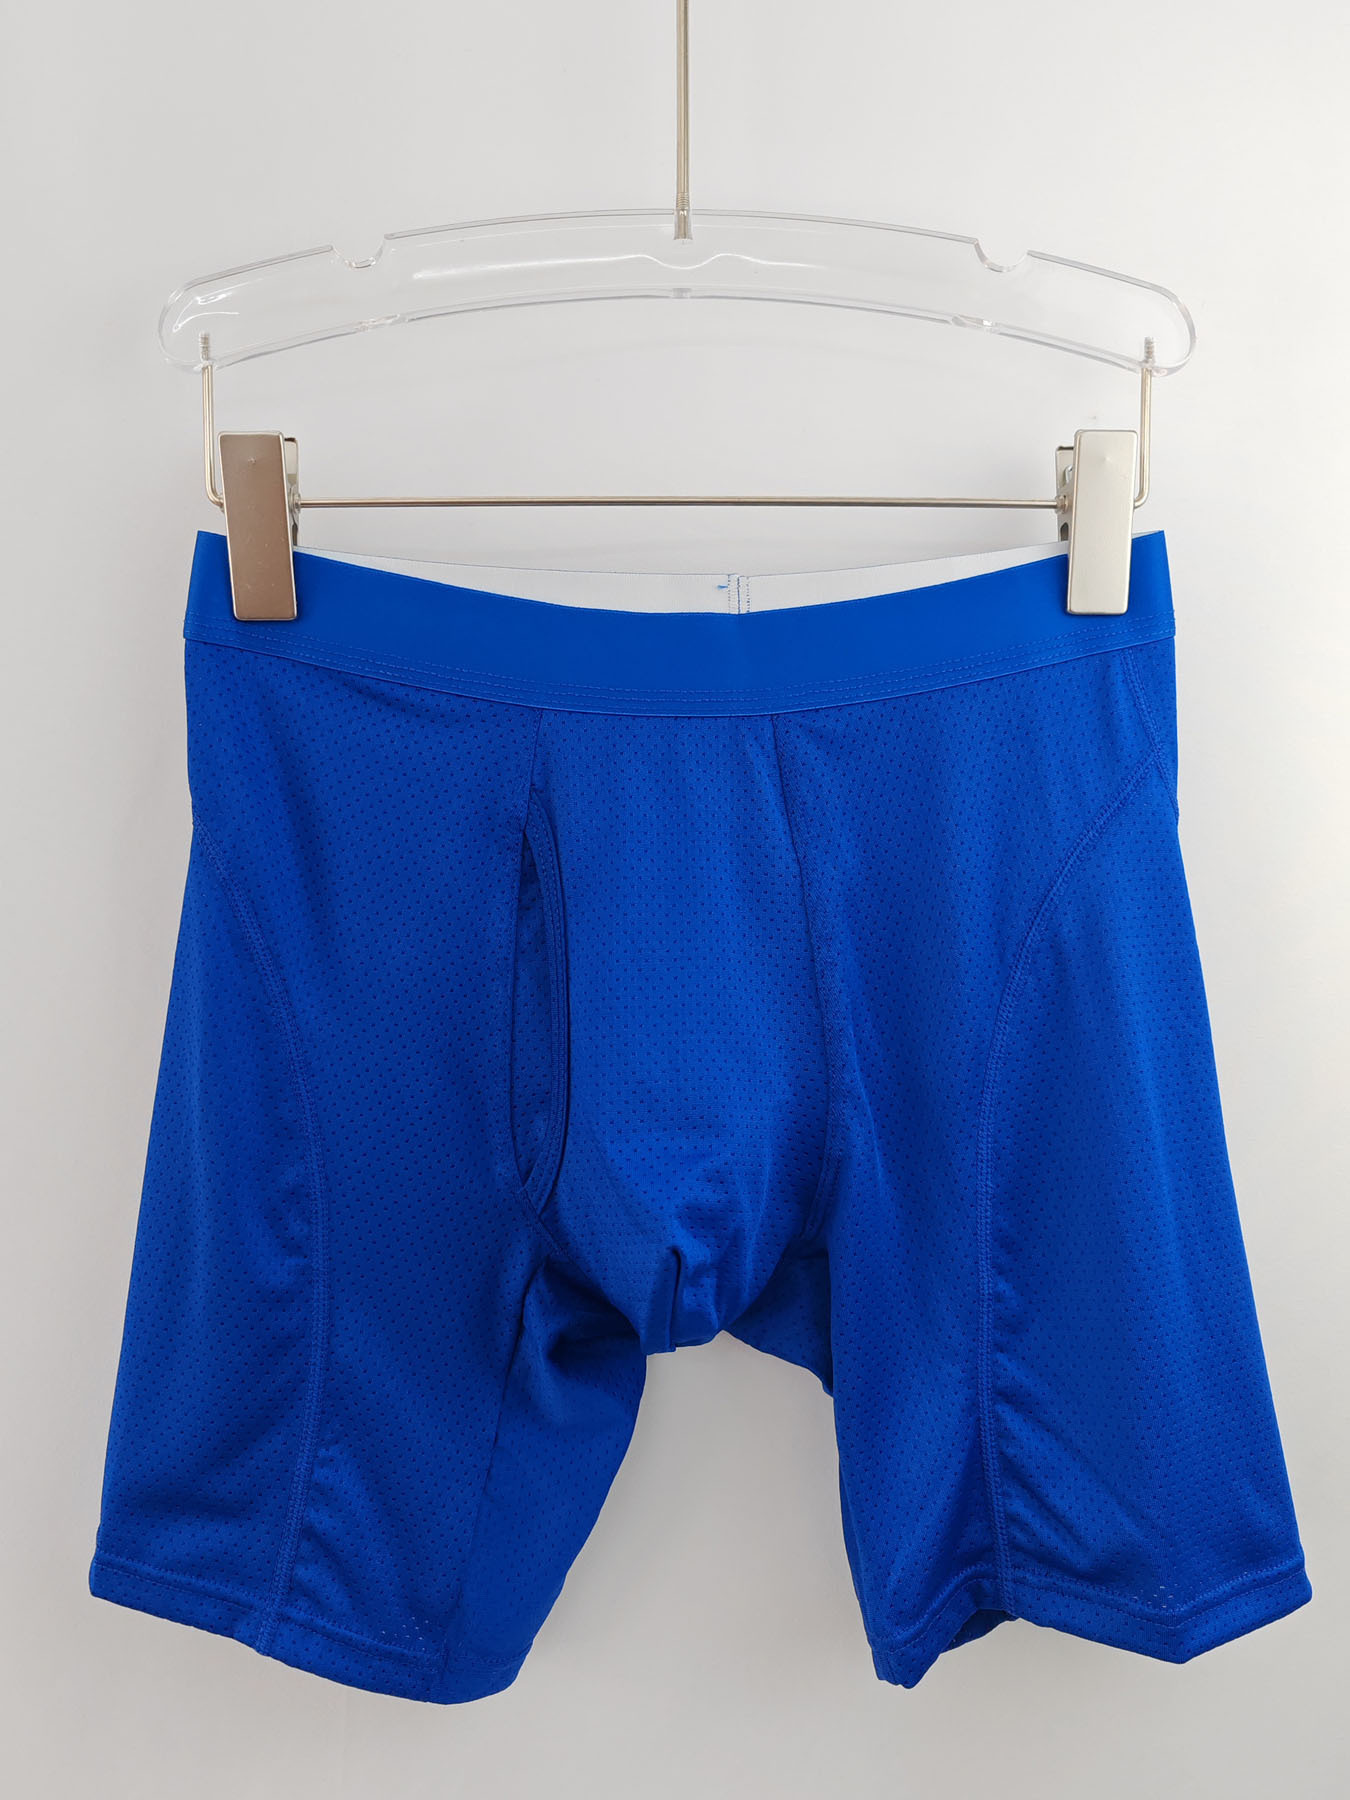 Shorts  New Royal Blue Athletic Shorts With Built In Underwear